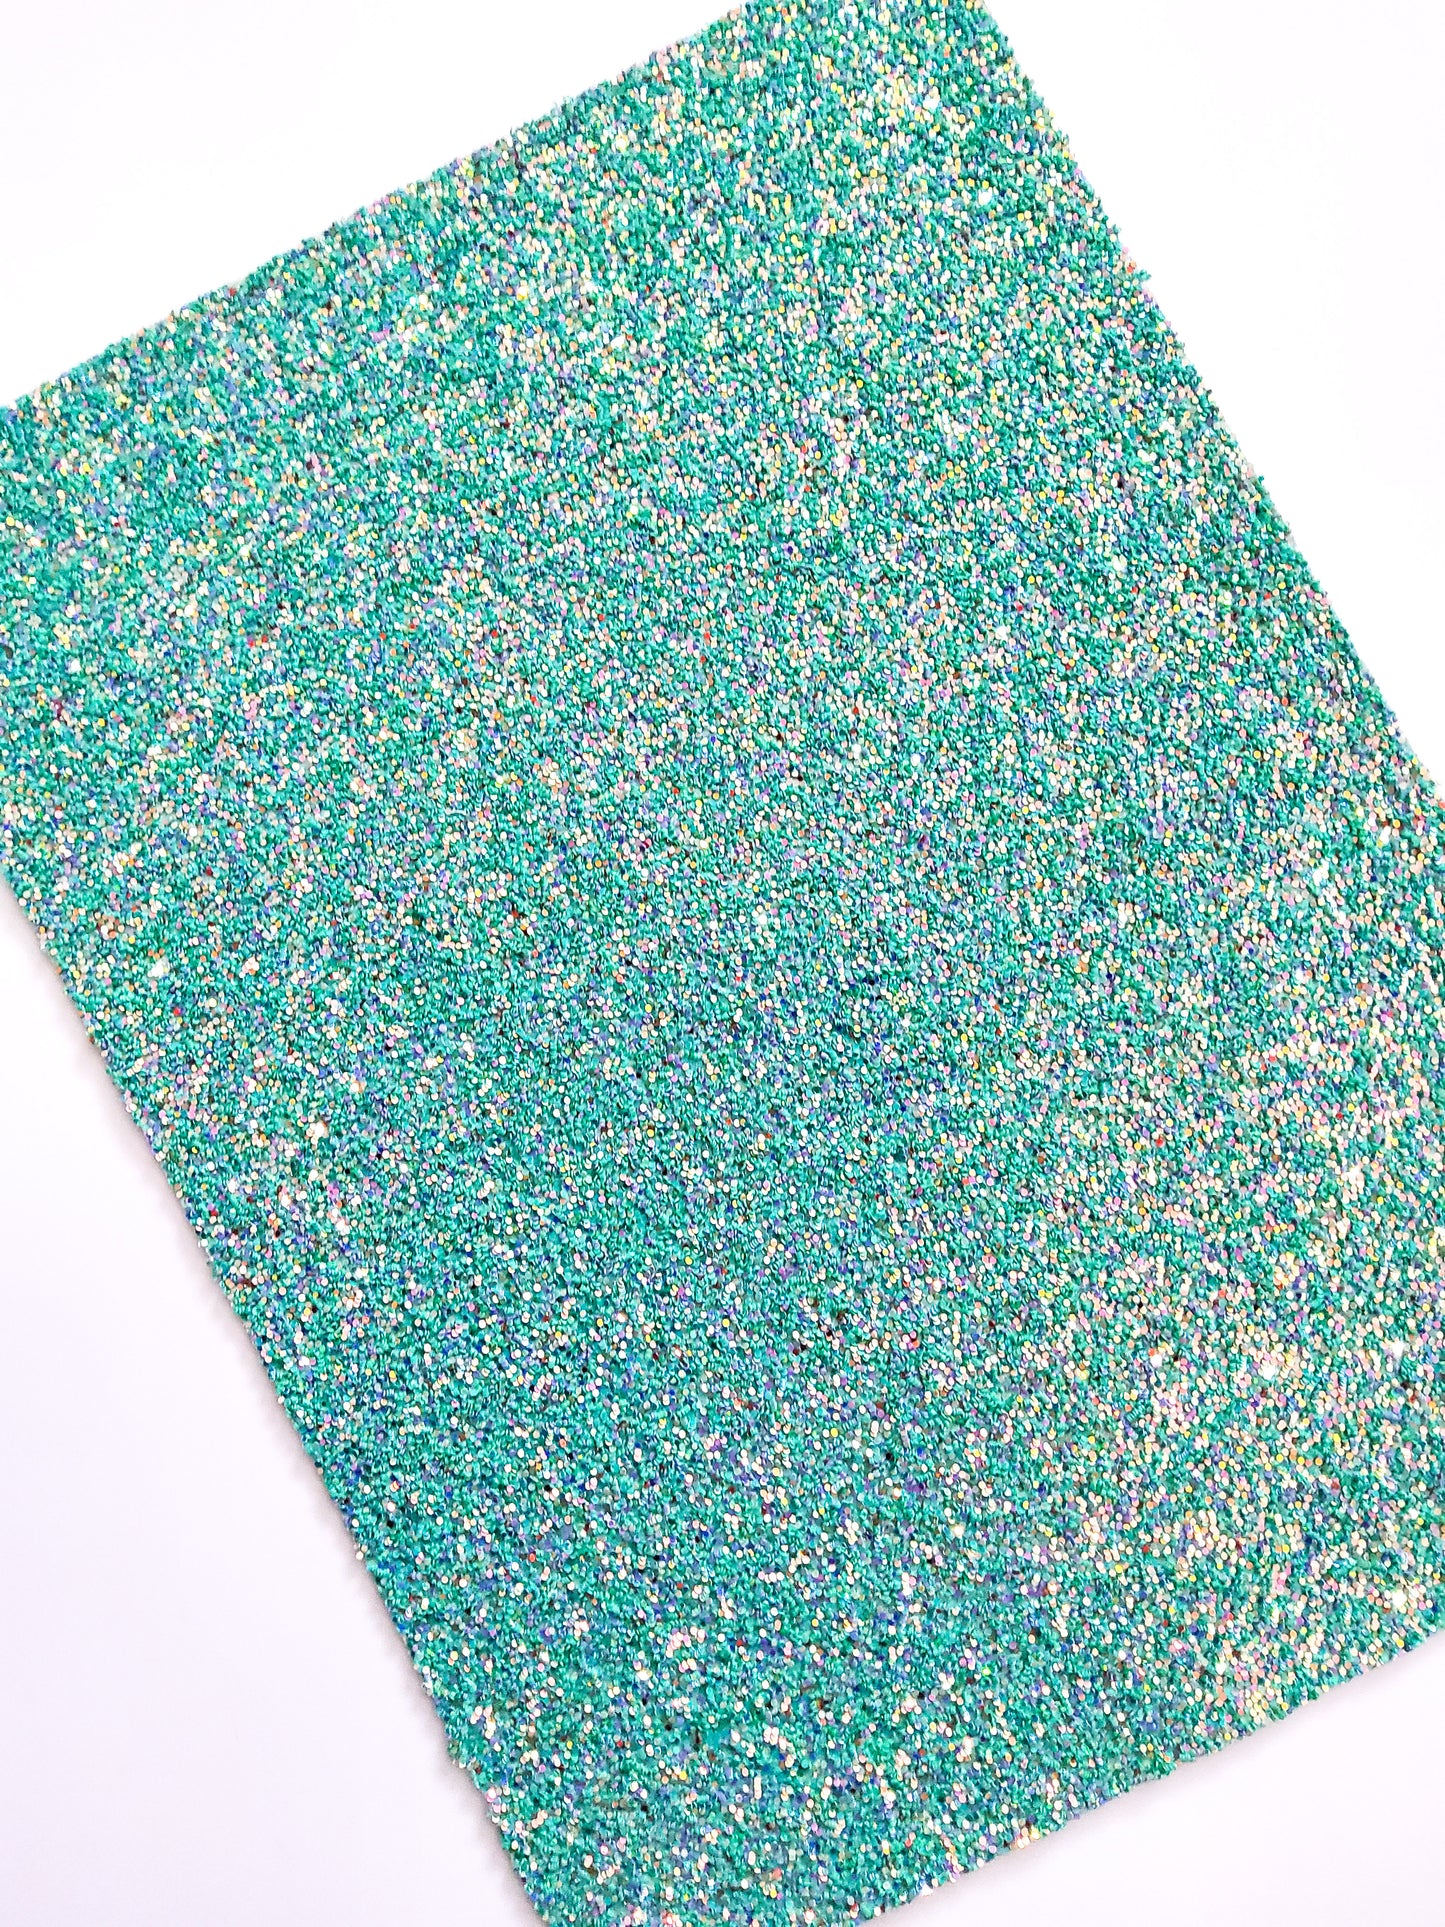 Minty Lavender Chunky Glitter 9x12 faux leather sheet